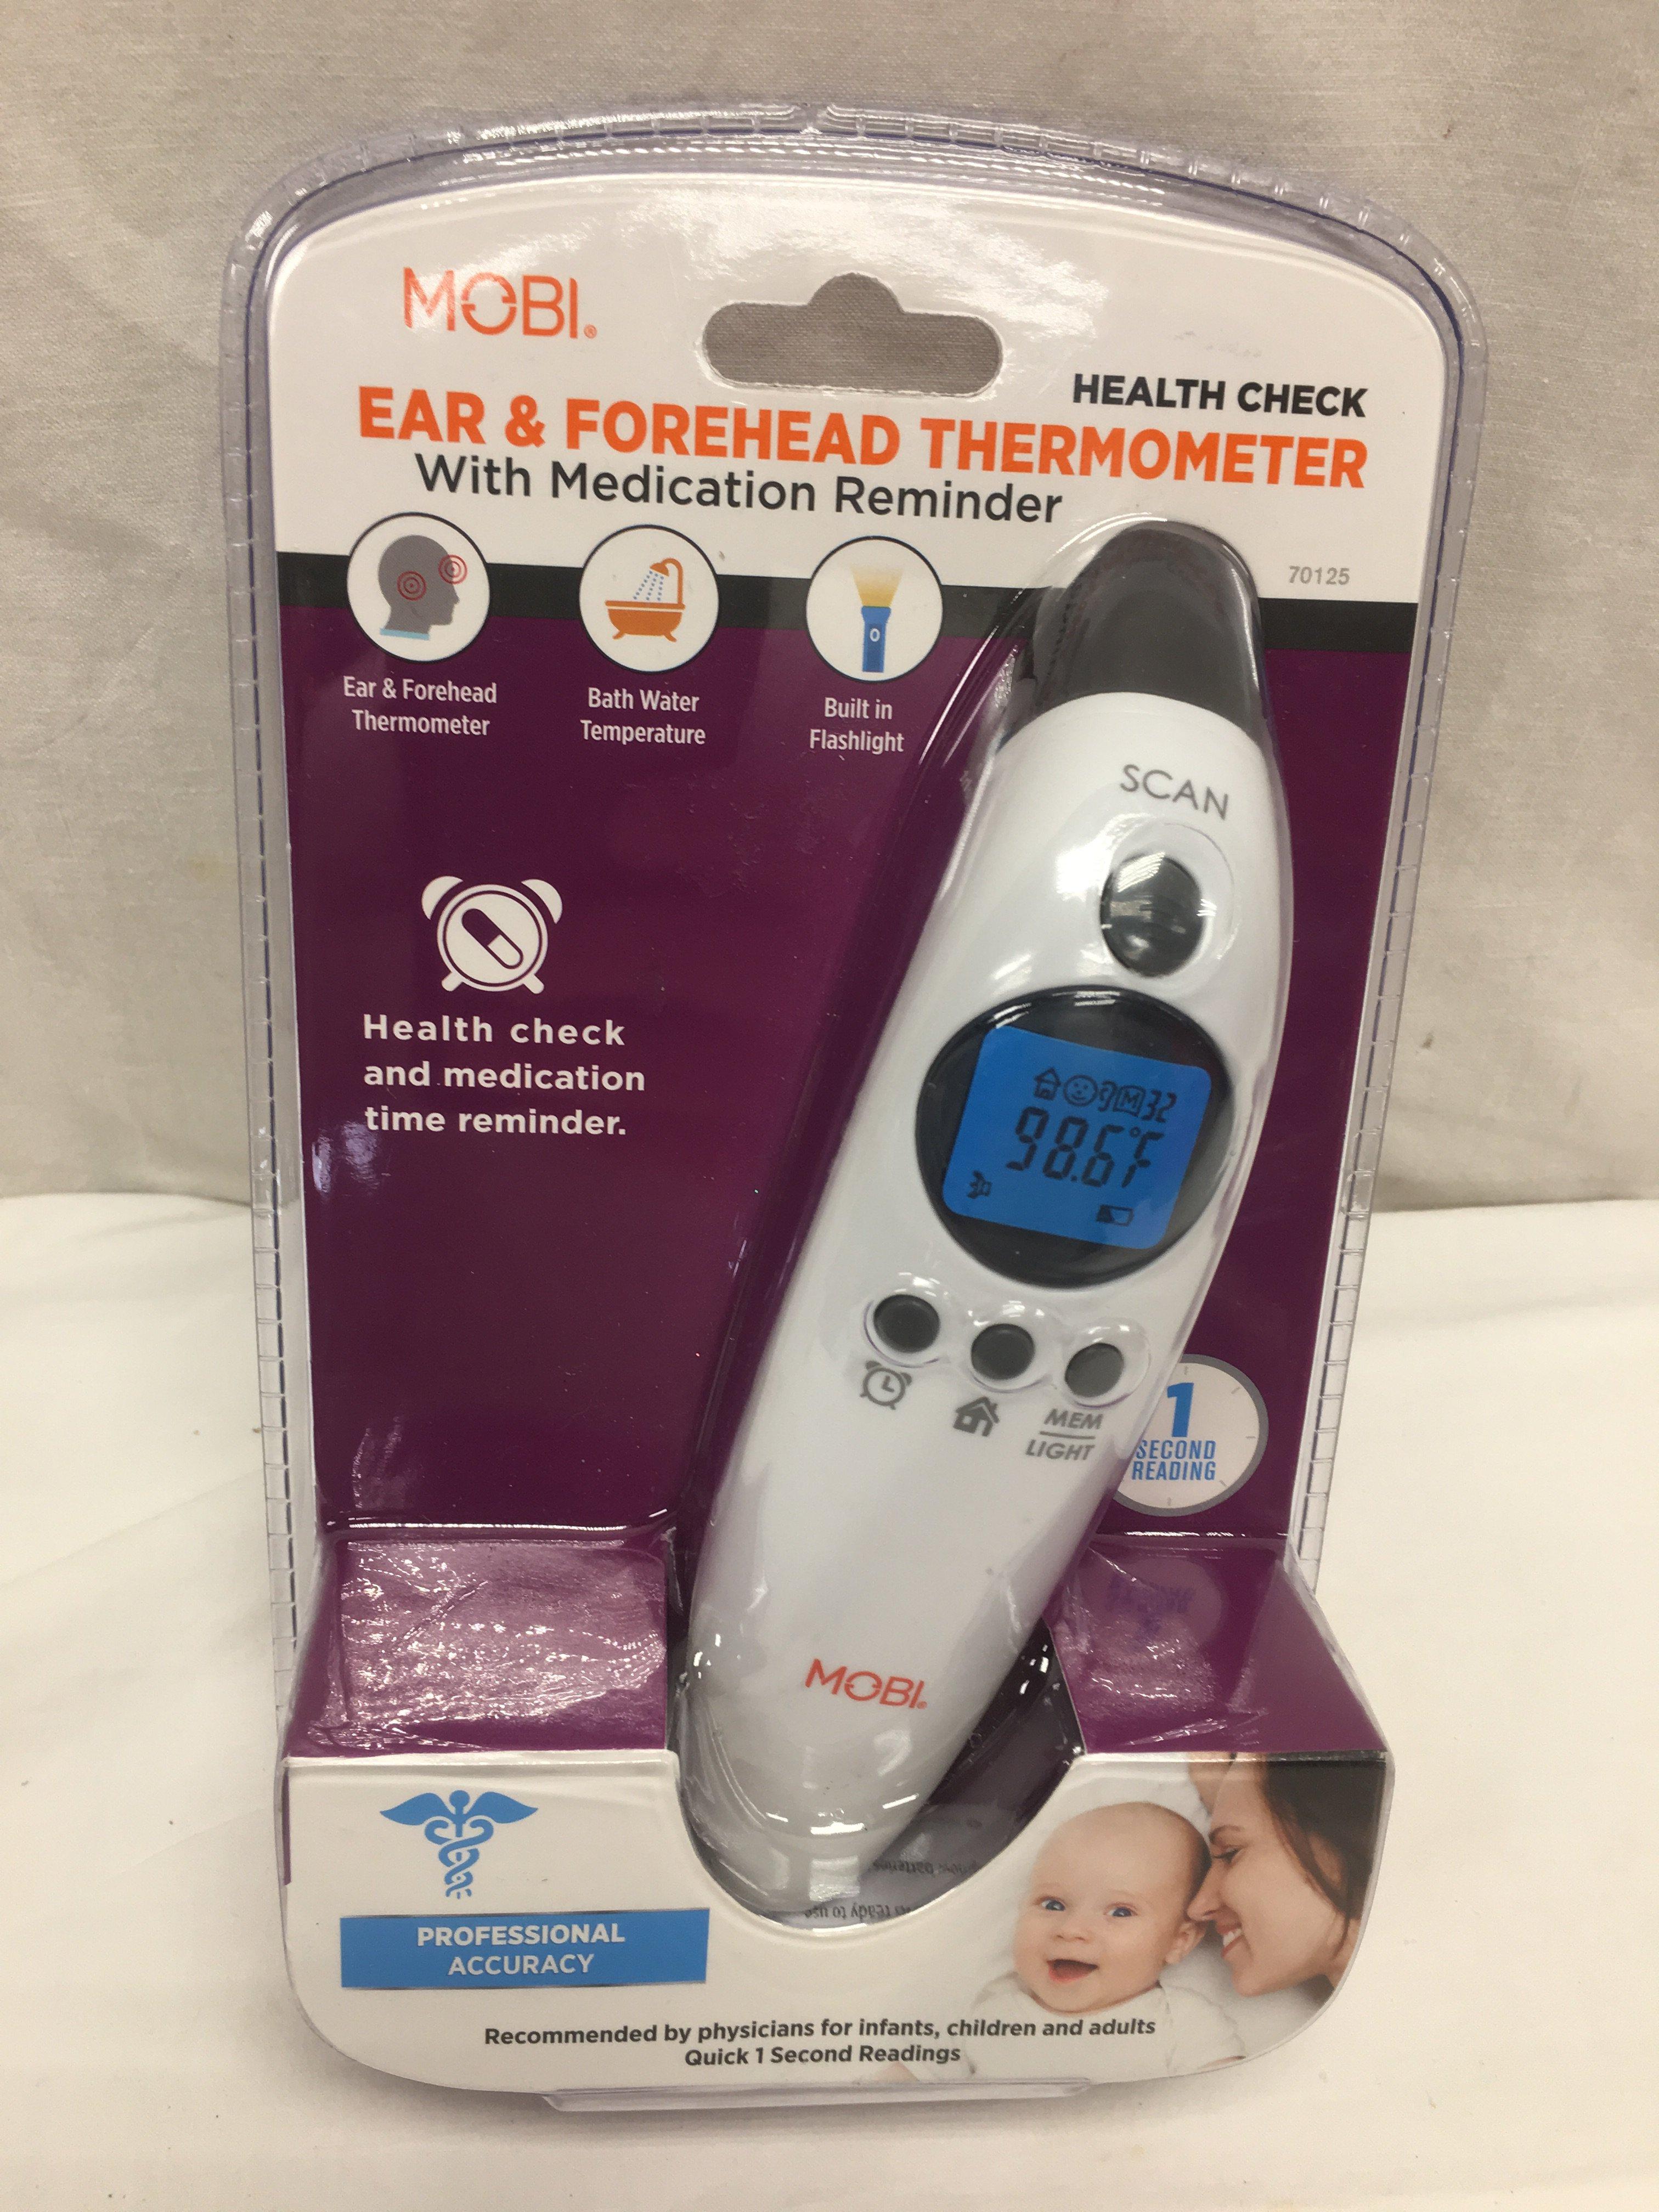 MOBI Health Check Ear & Forehead Thermometer with Medication Reminder